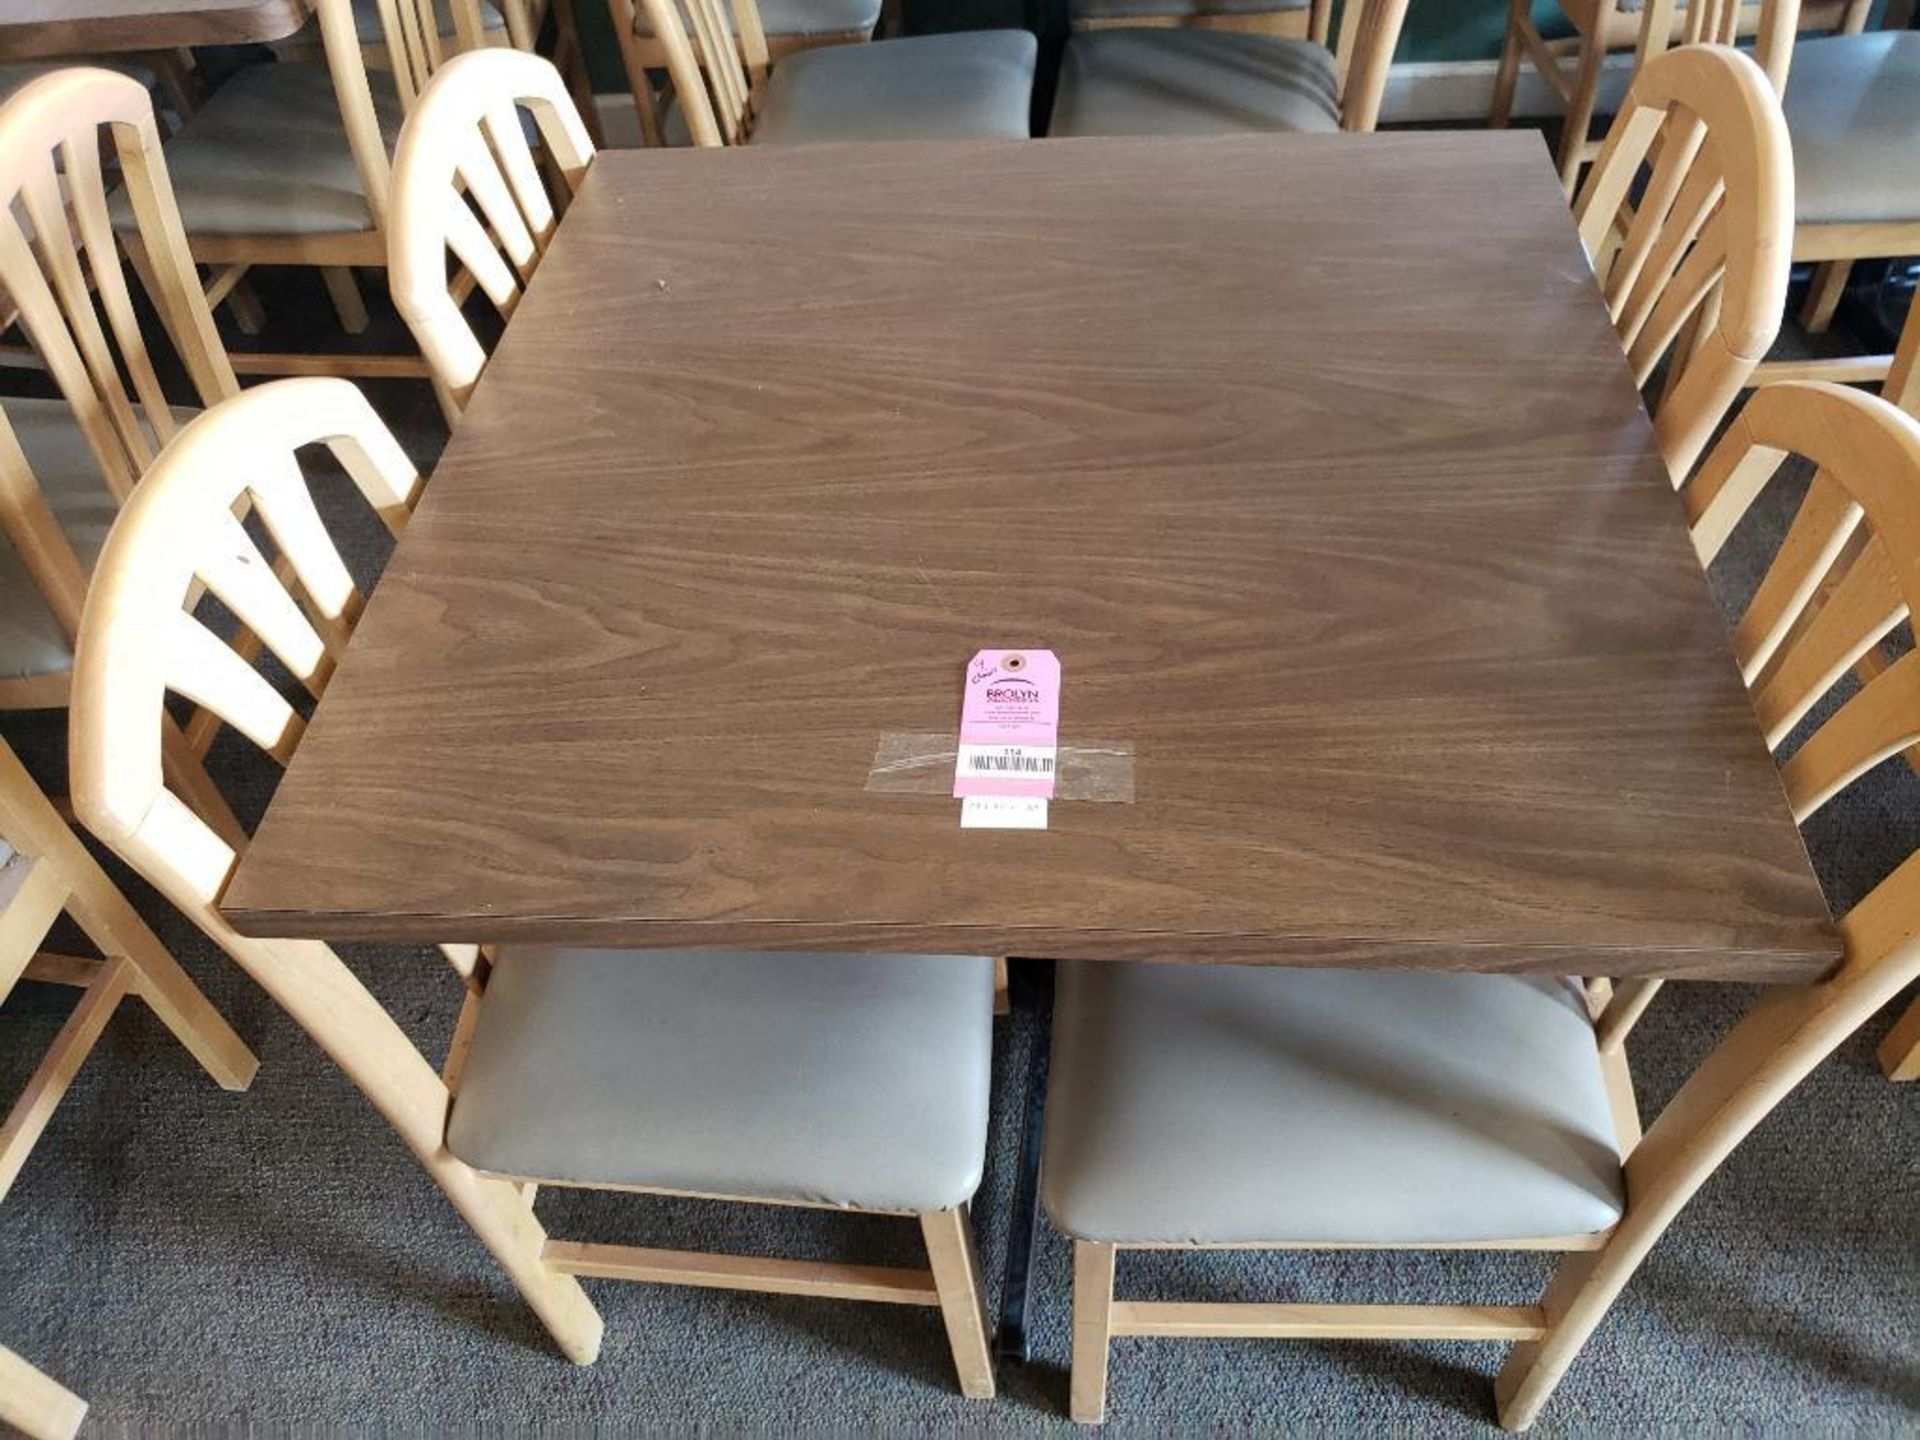 Table with 4 chairs. Table size 35in x 35in.